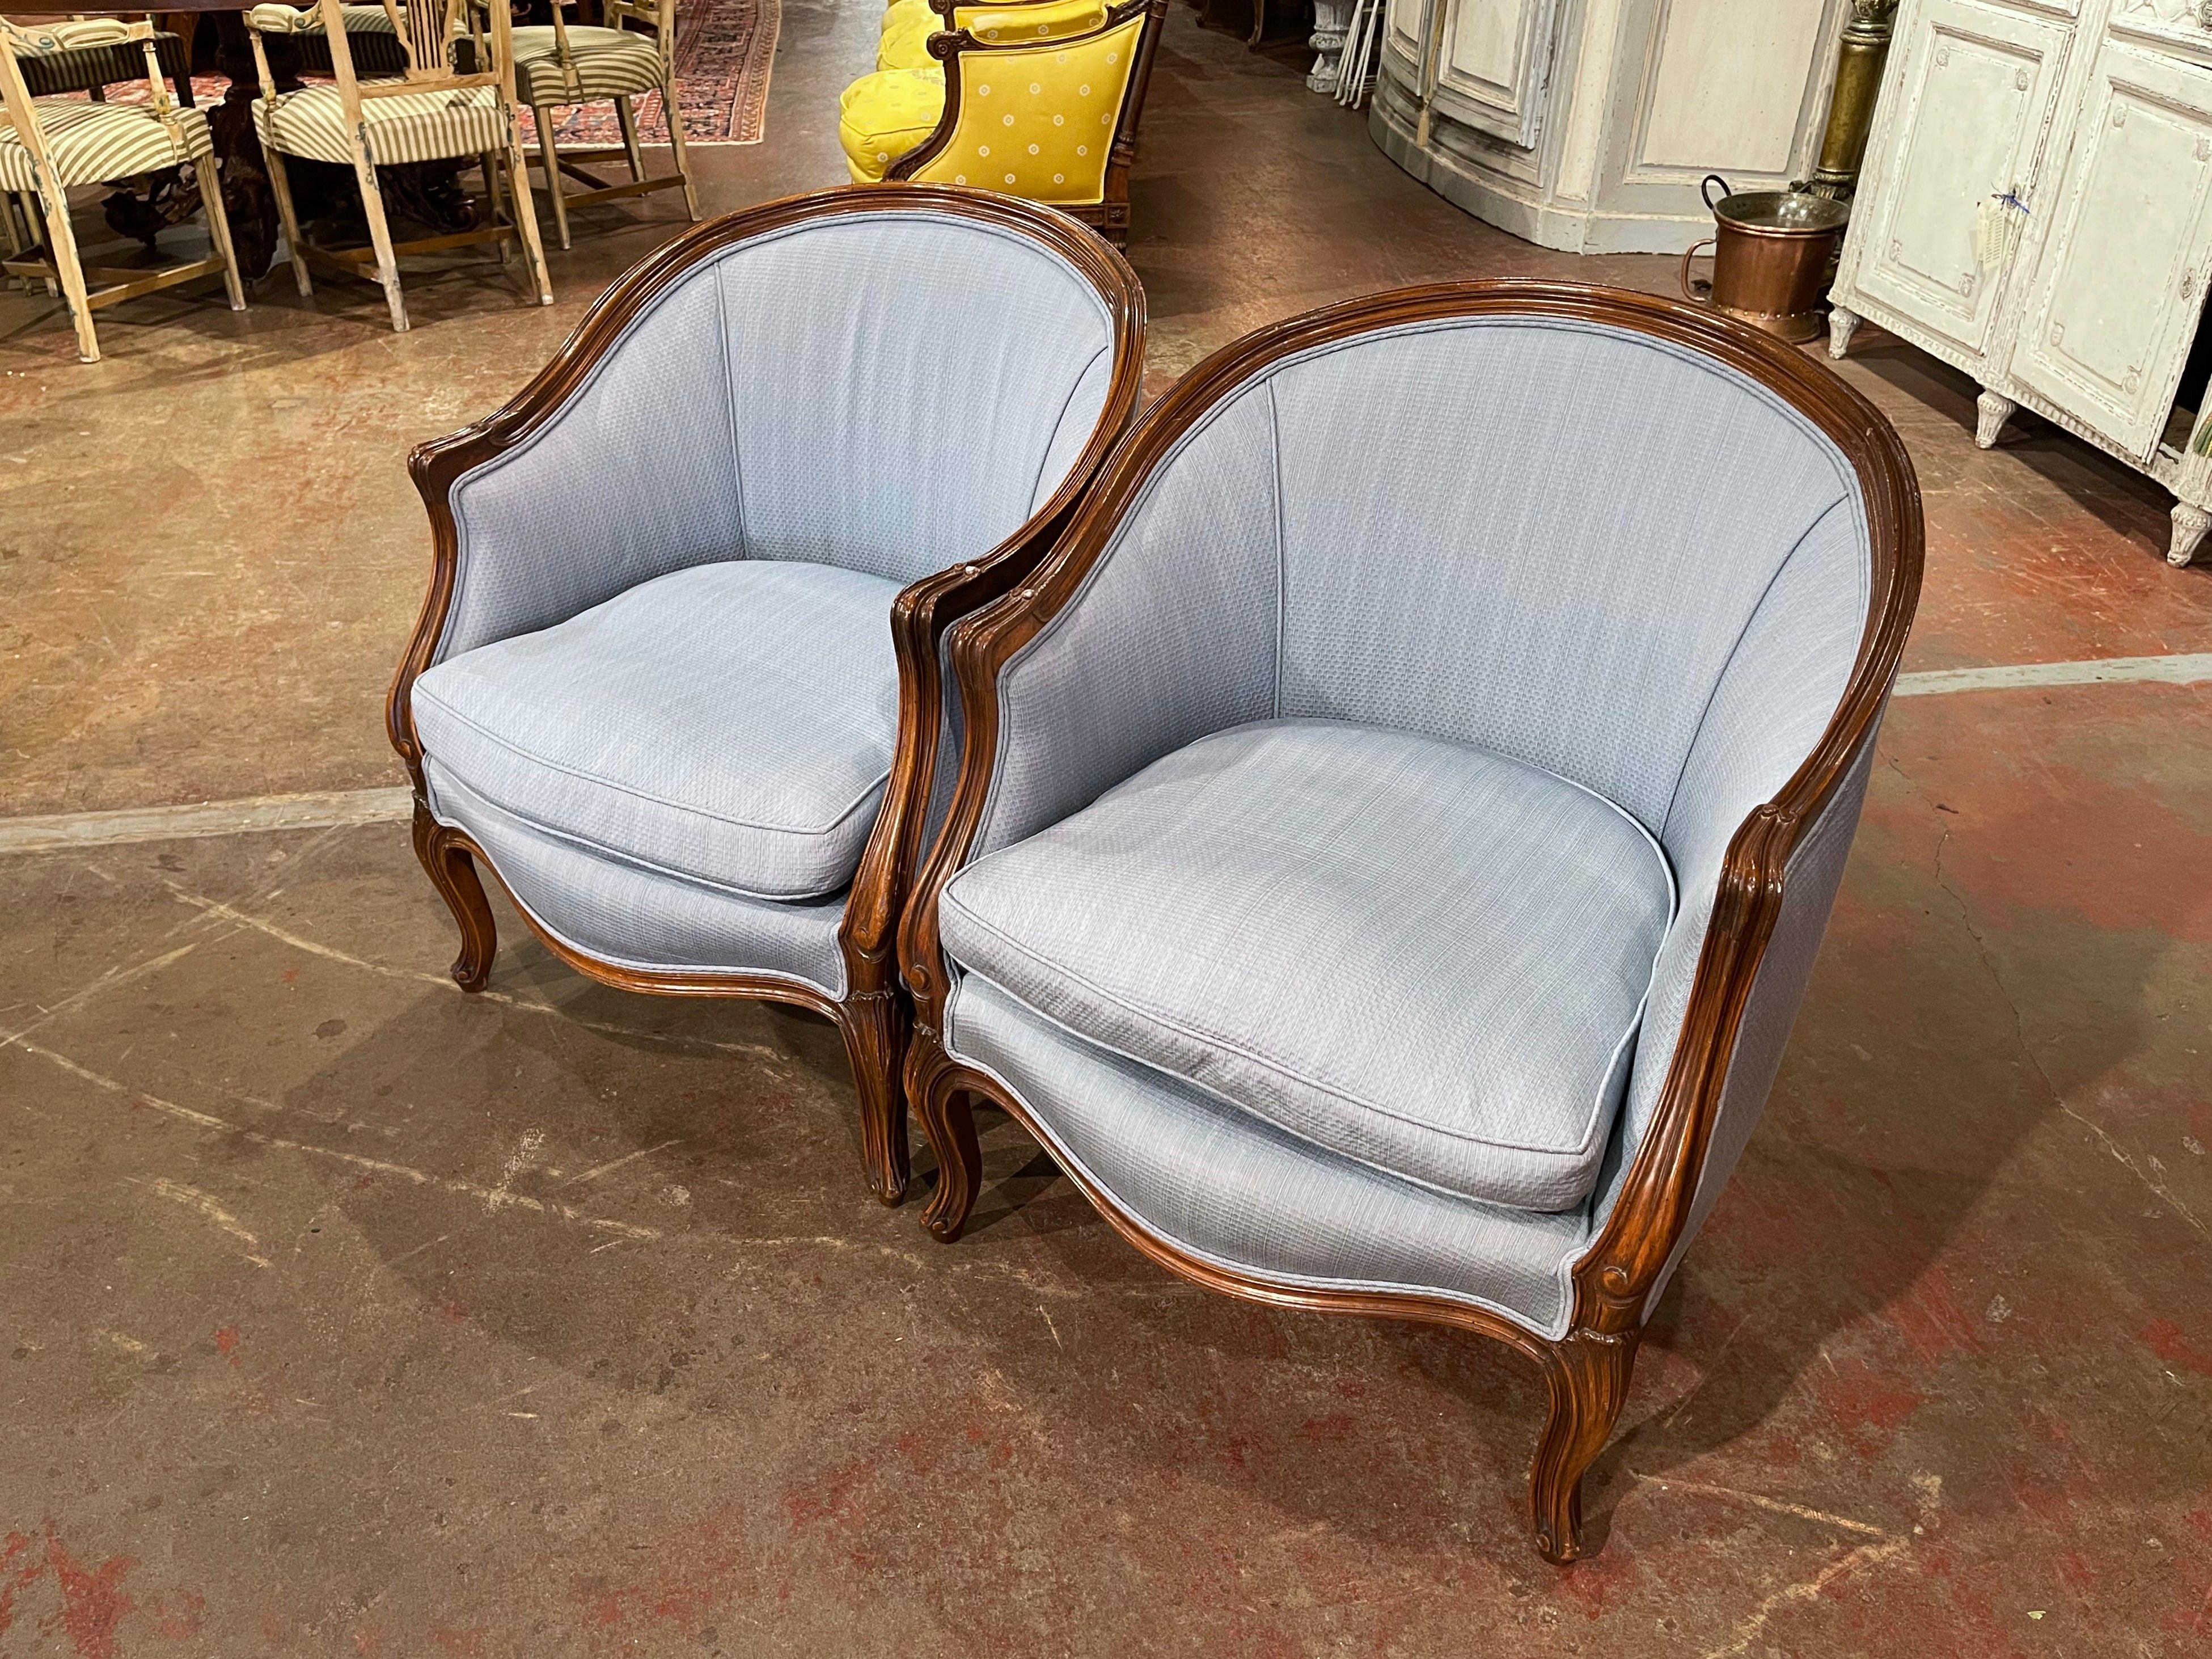 Decorate an office or a study with this elegant pair of antique armchairs; crafted in France circa 1920, the 